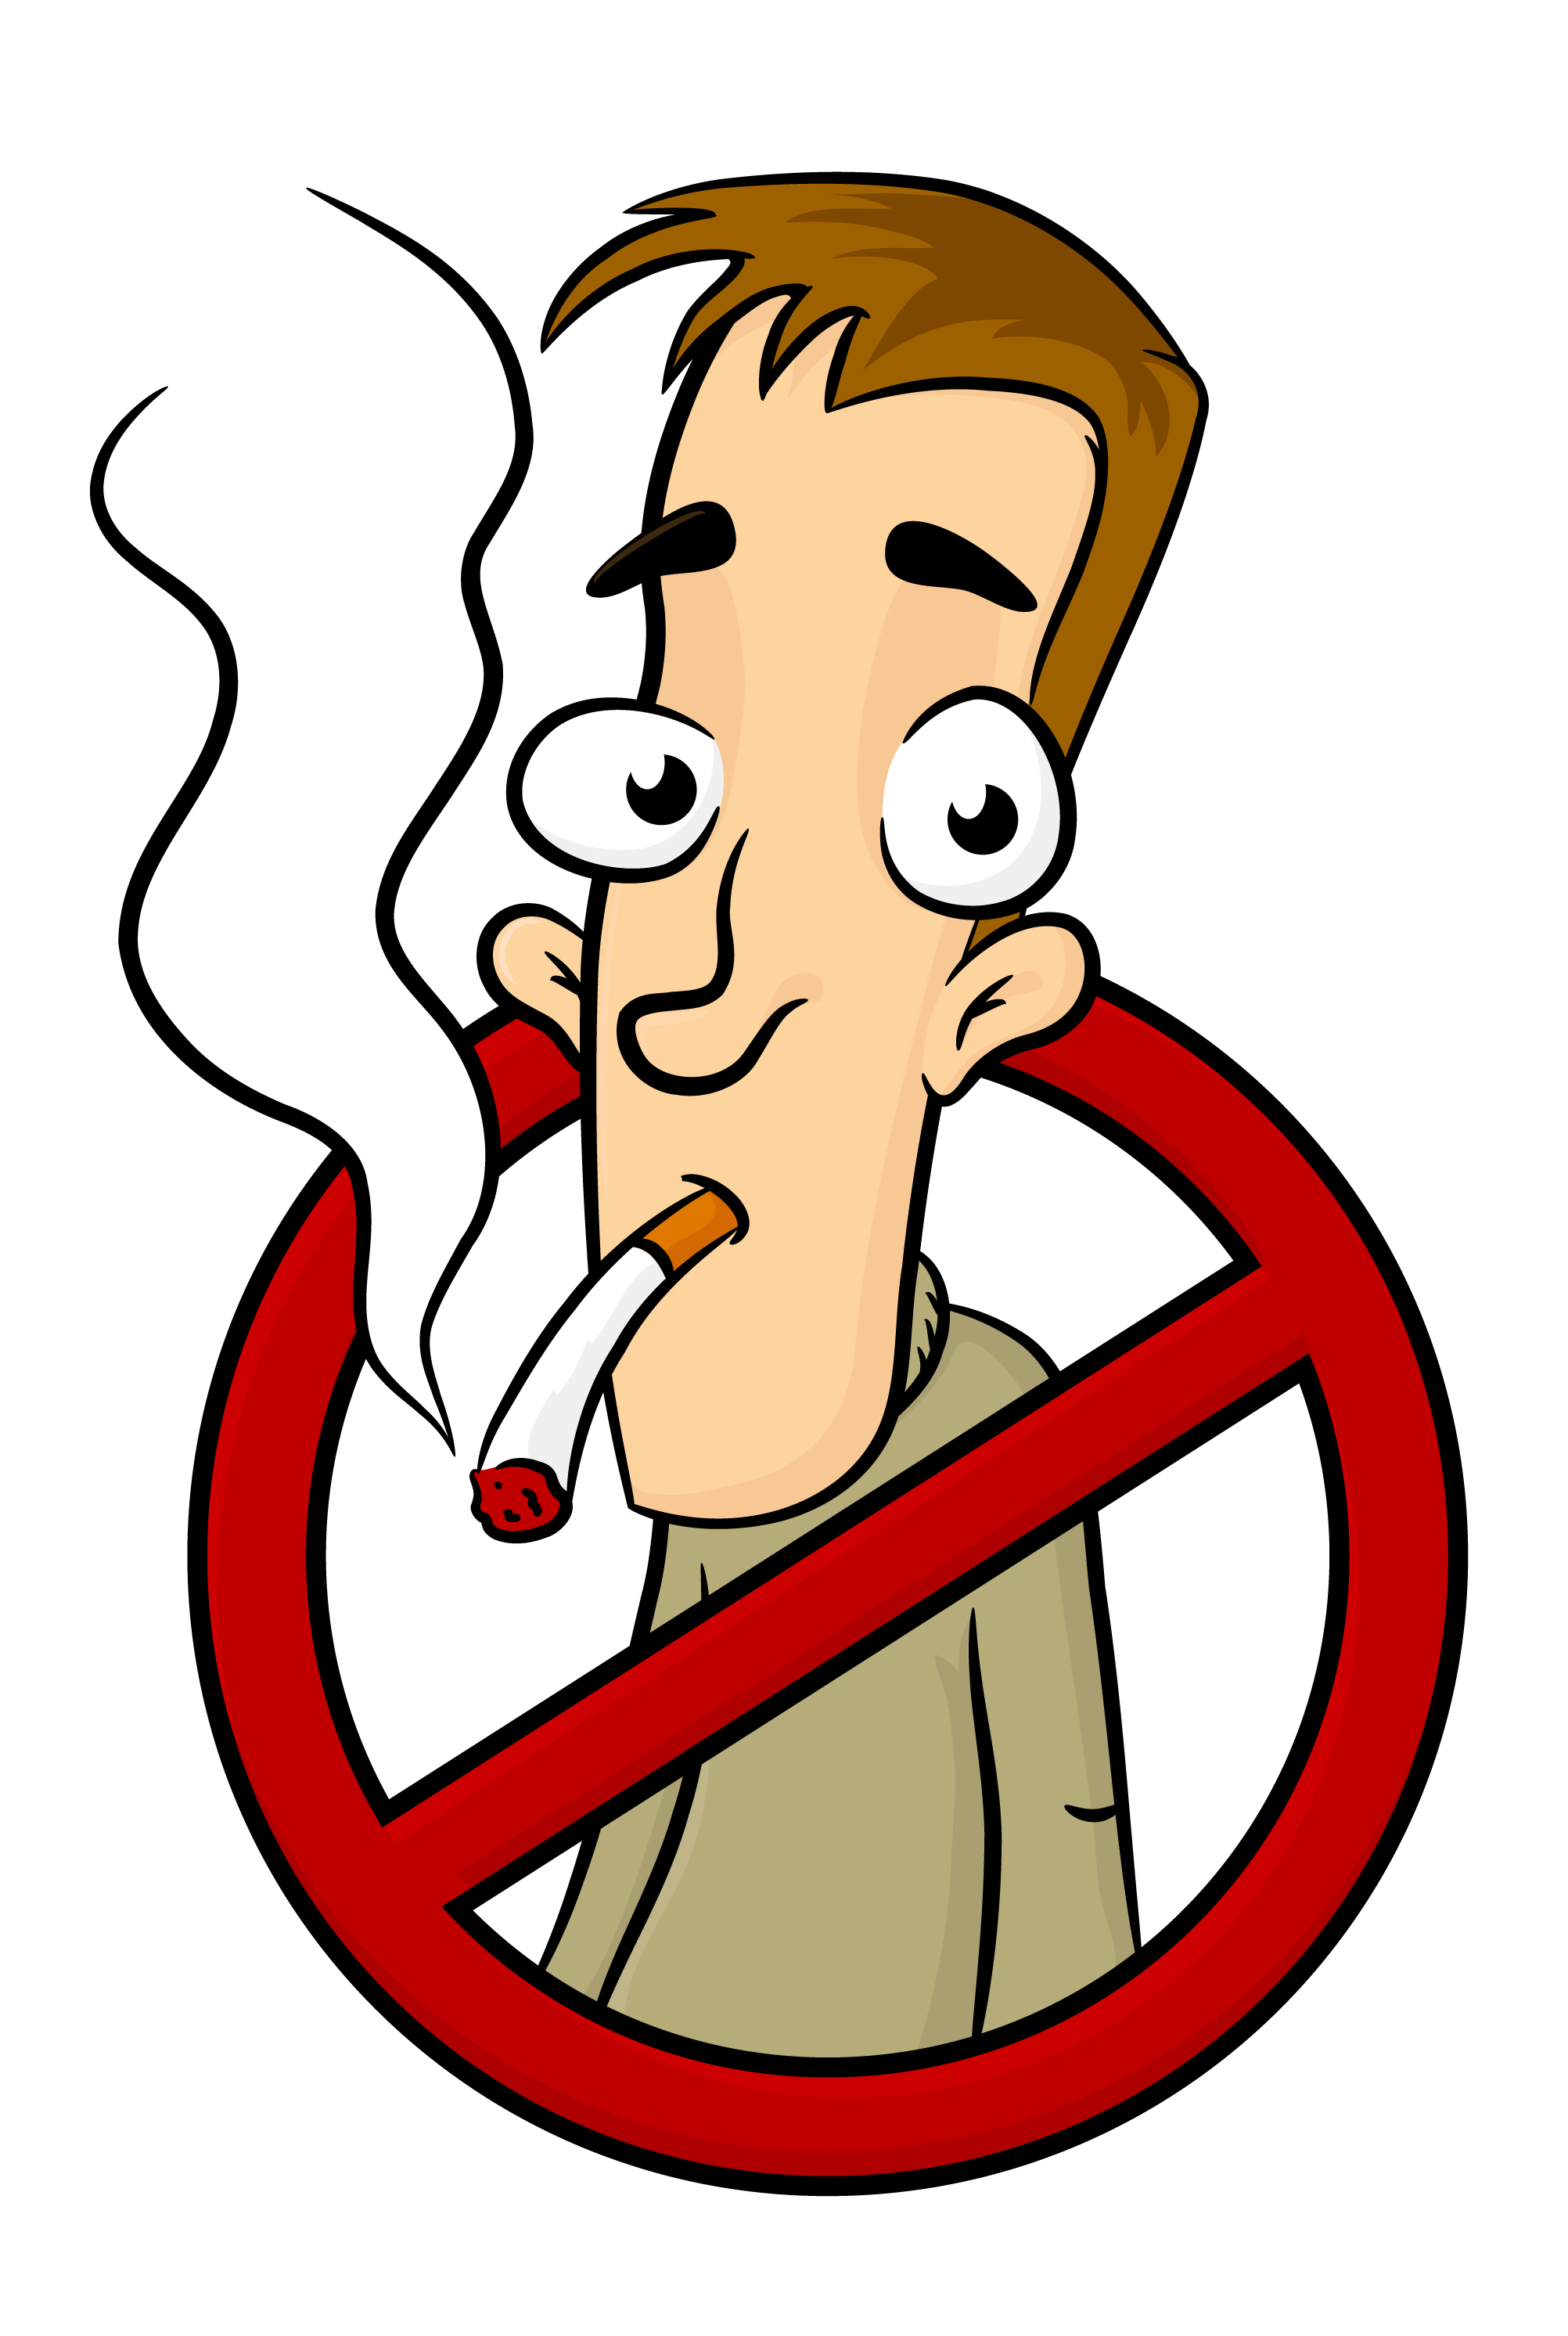 Free Smoking Cliparts, Download Free Clip Art, Free Clip Art.